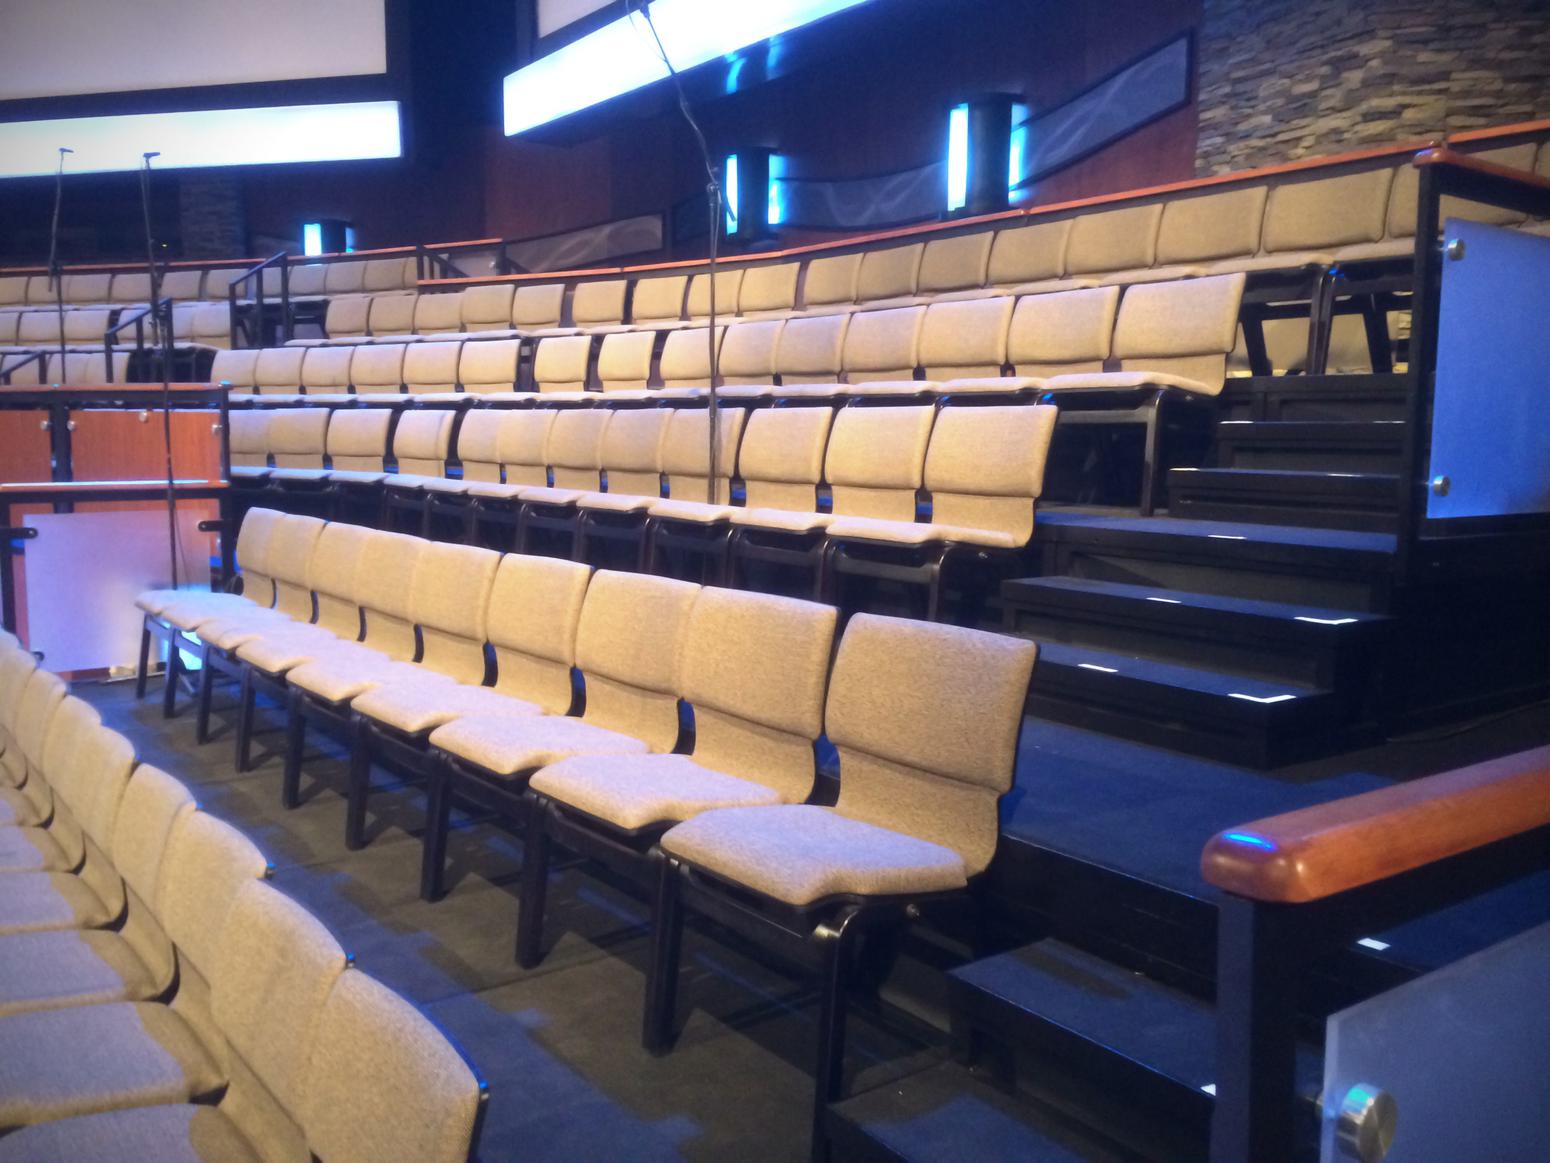 Church seating by Paragon includes these spacious pews.